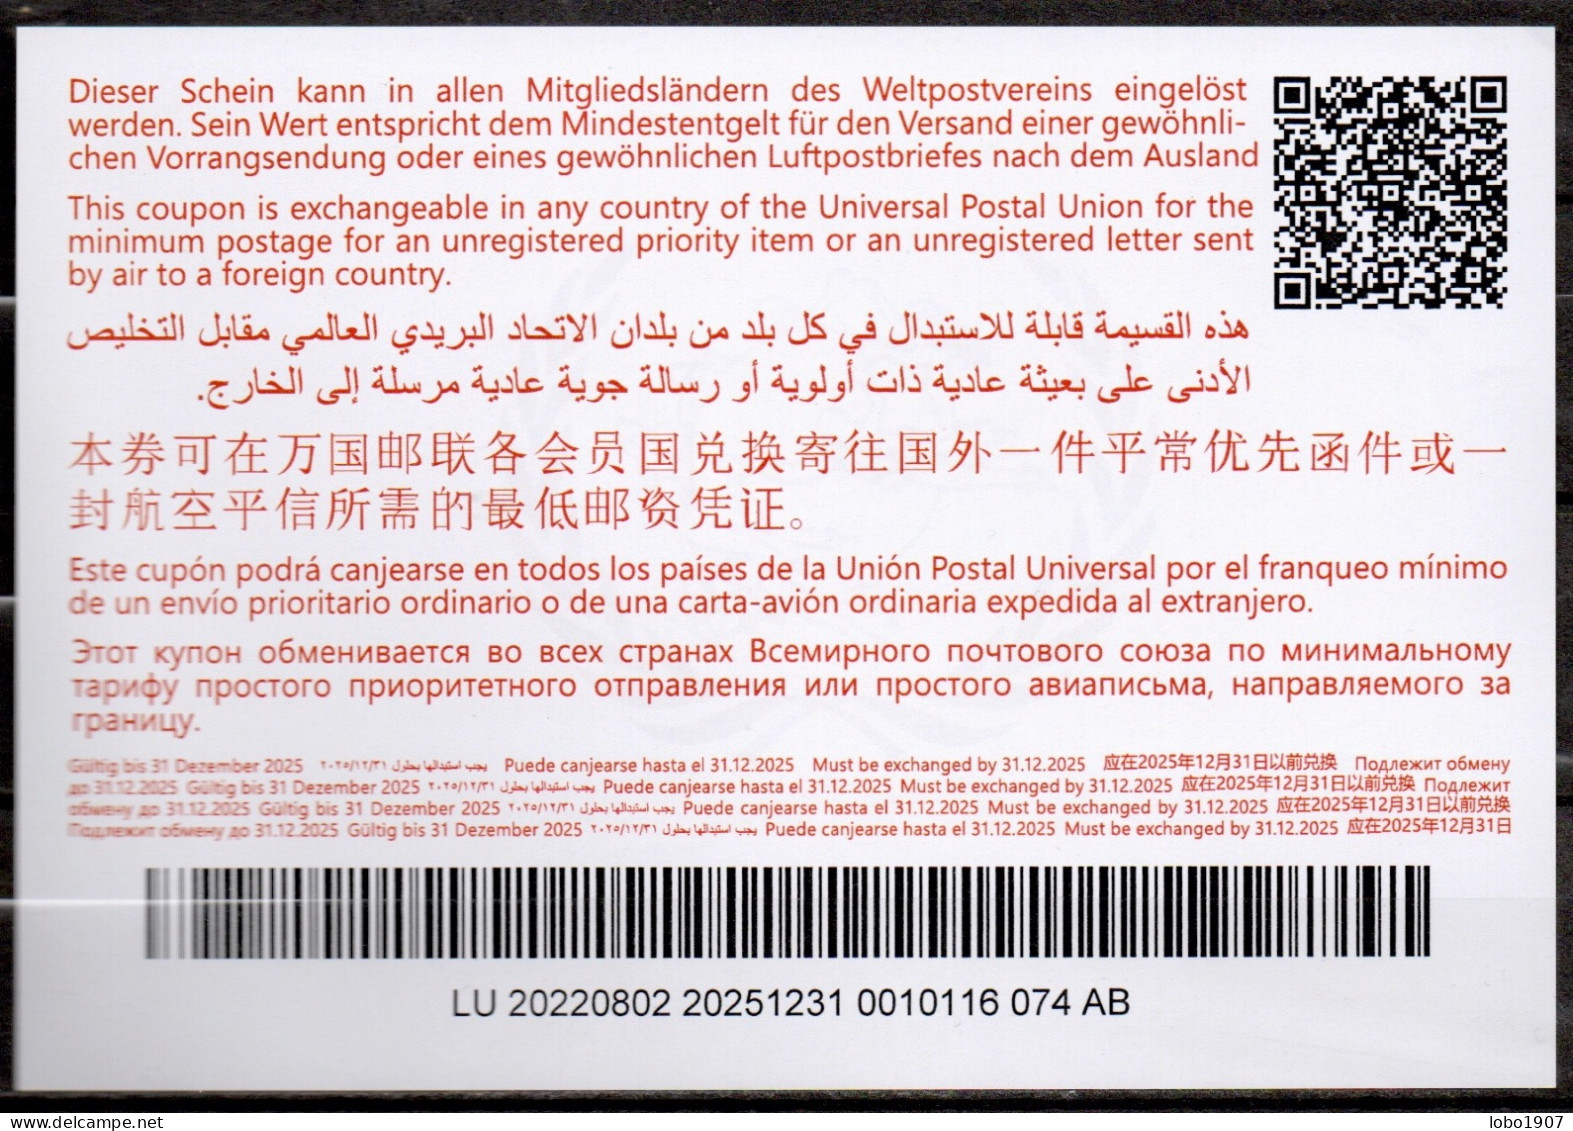 LUXEMBOURG  Abidjan Special Issue  Ab49  20220802 AB  International Reply Coupon Reponse Antwortschein IRC IAS  Mint ** - Ganzsachen